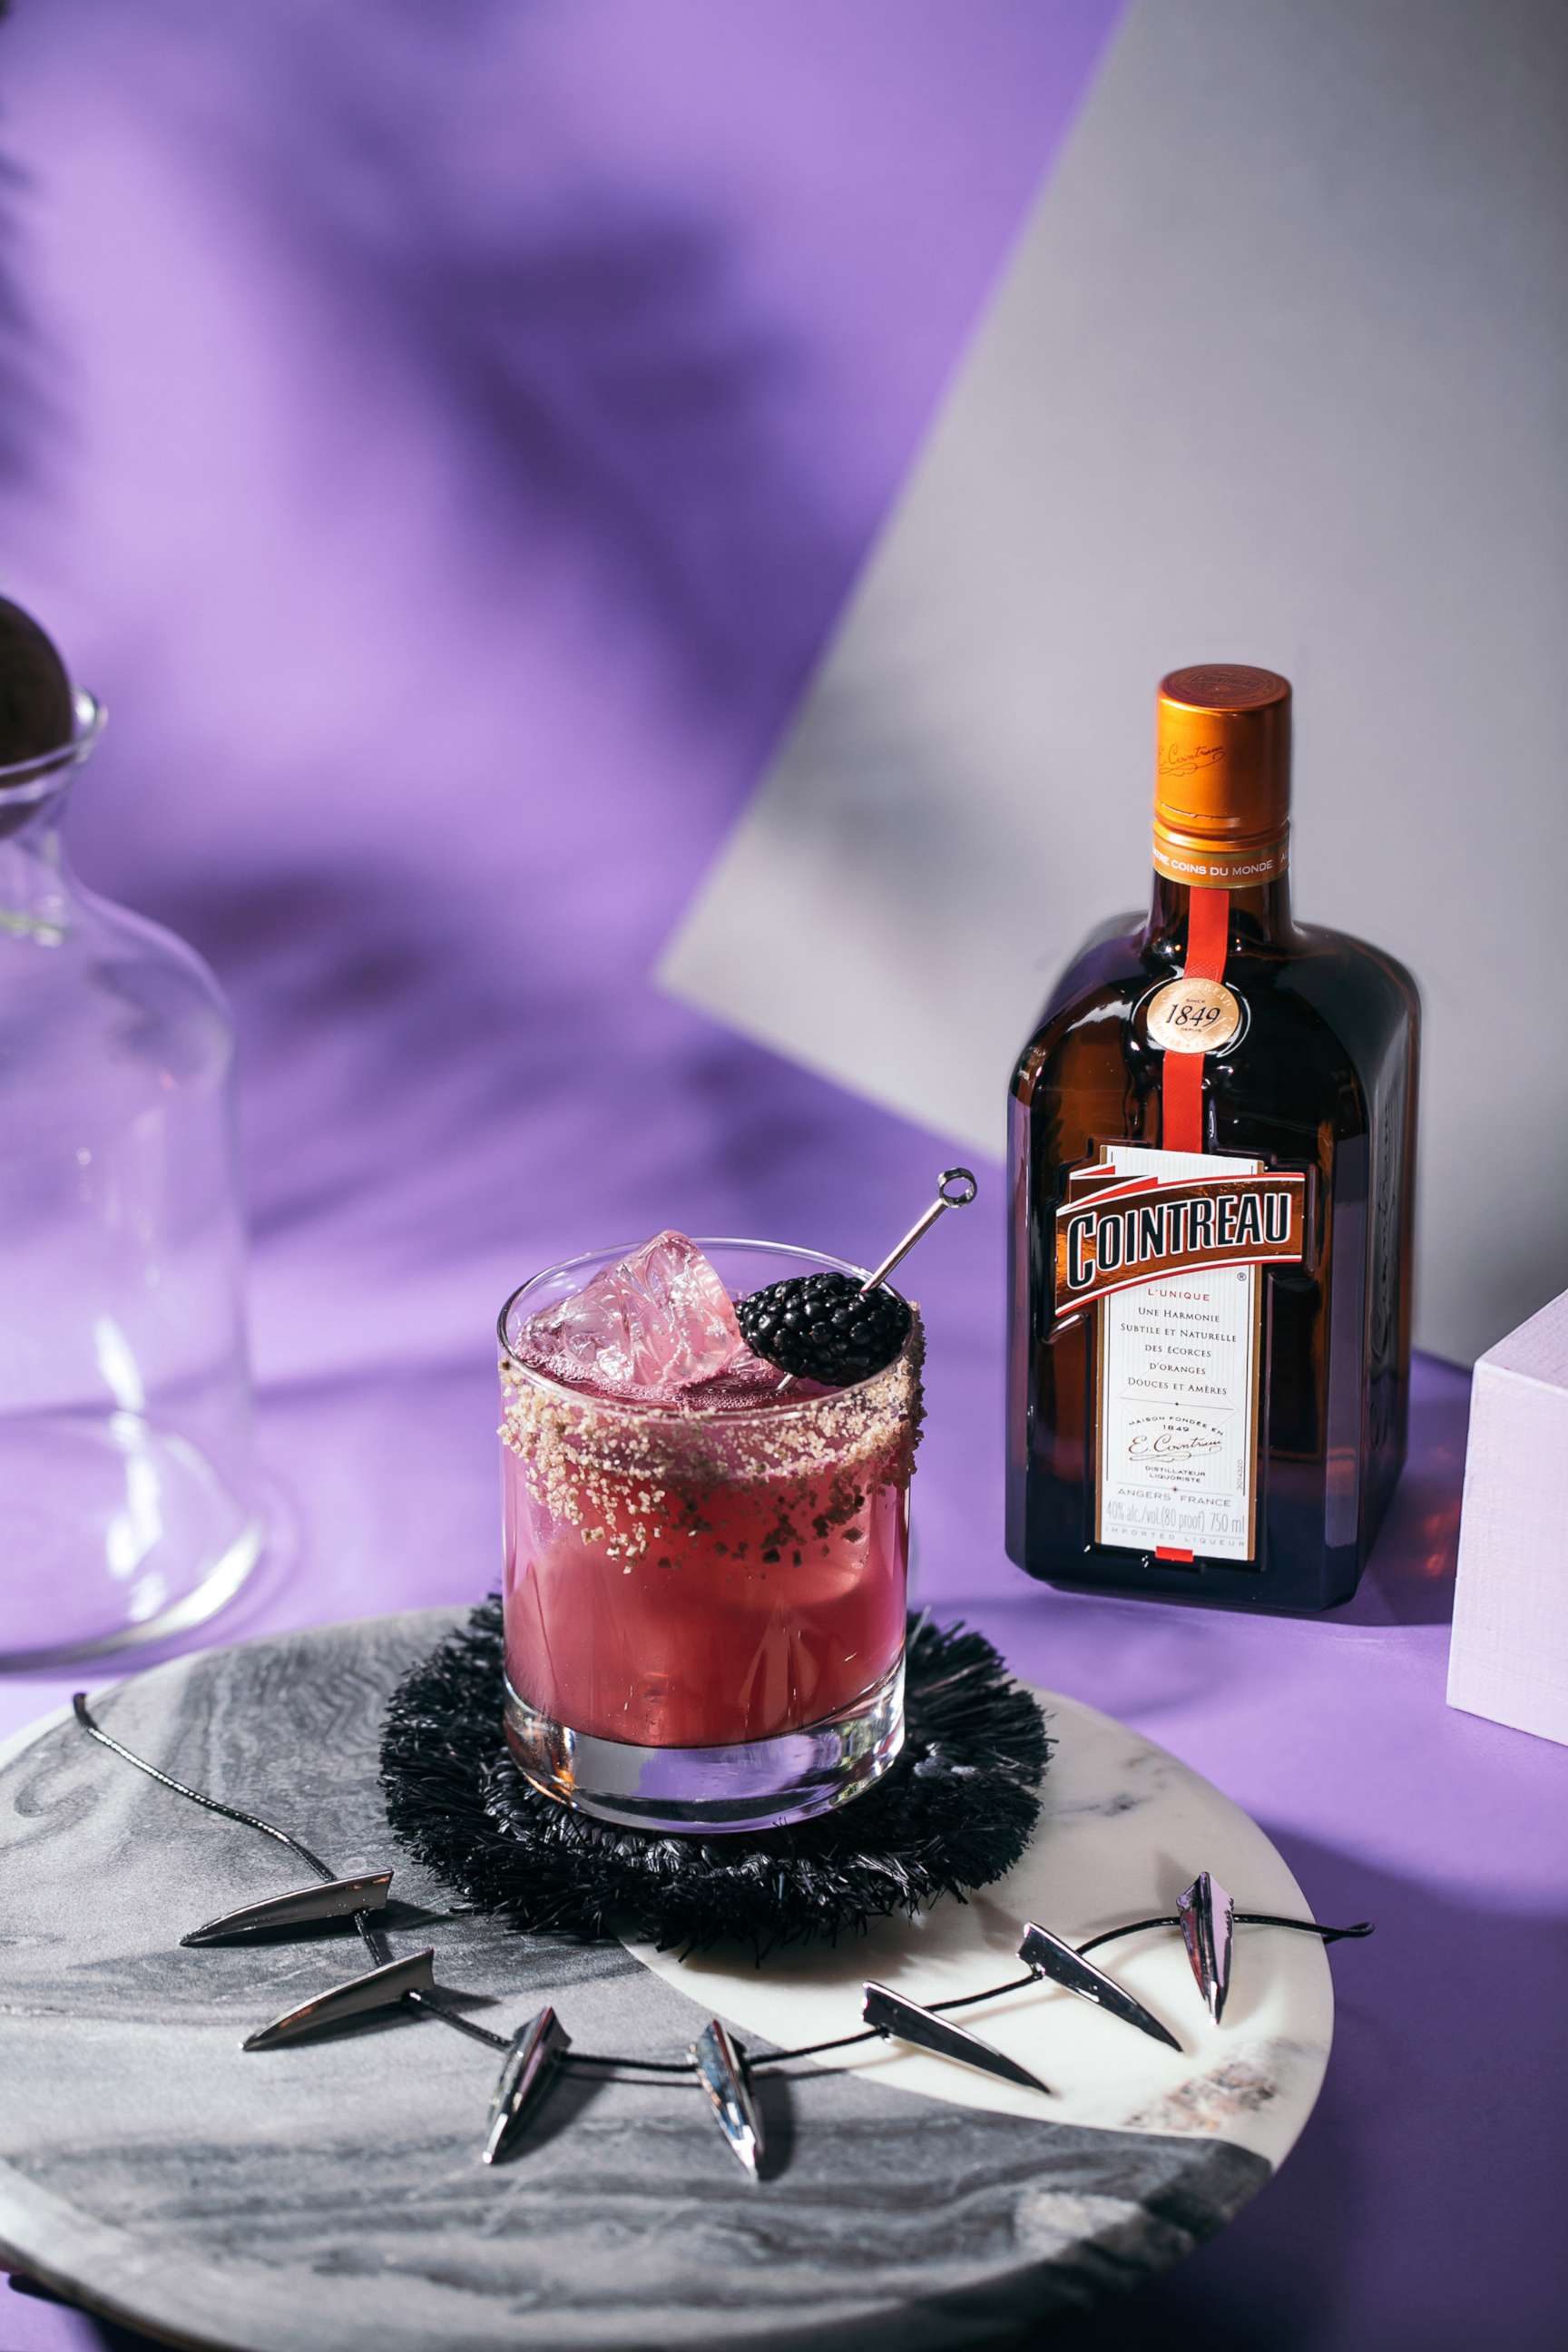 PHOTO: The Wakanda Forever cocktail was inspired by the Best Picture nominated film "Black Panther."